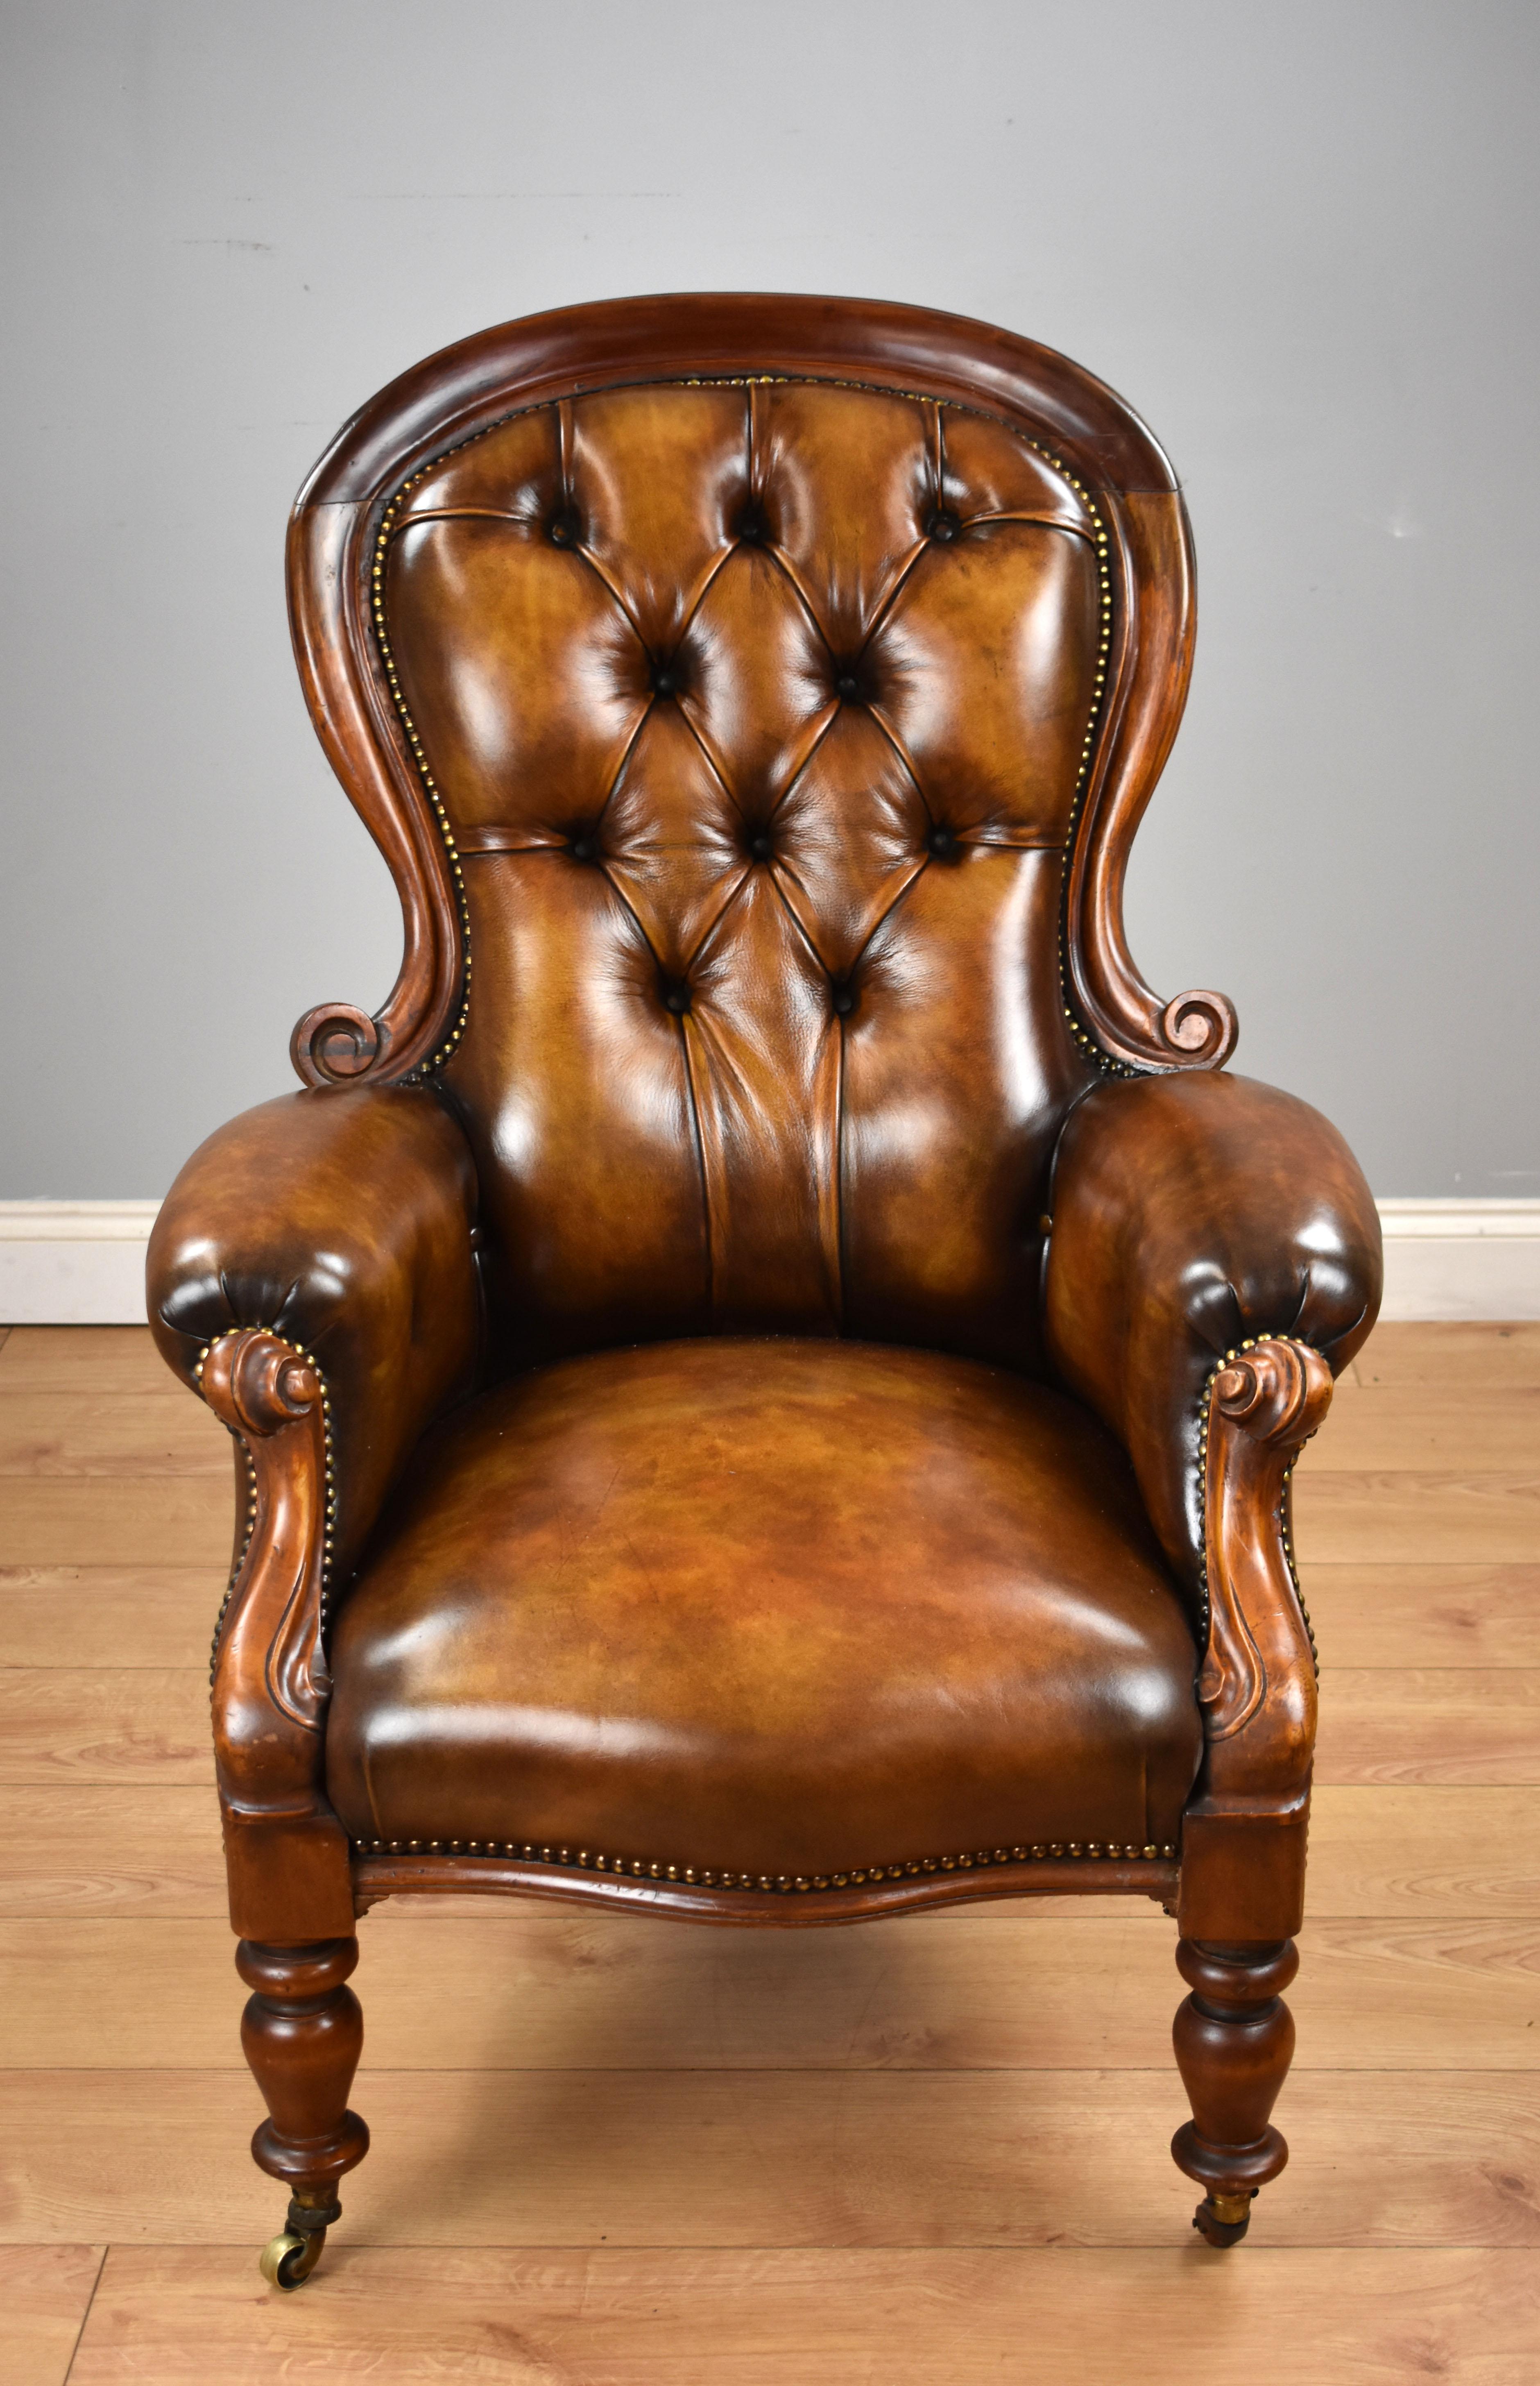 For sale is a good quality Victorian mahogany spoon back armchair, upholstered in quality leather hide and hand coloured to a high quality finish, the chair has a deep buttoned back and a carved frame, standing on turned legs terminating on castors.